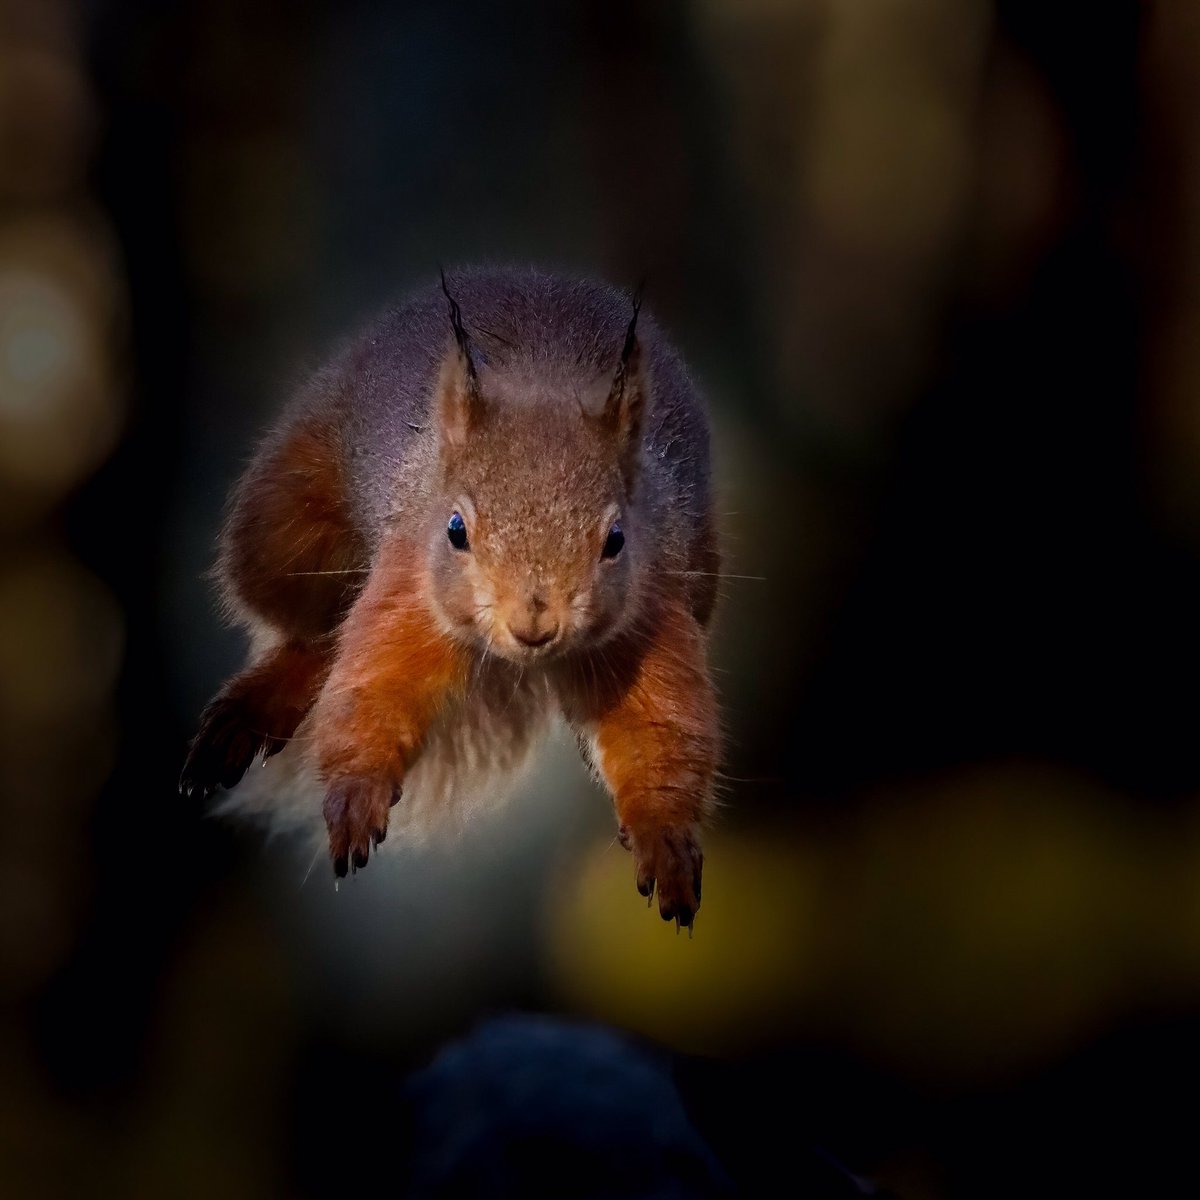 Leaping red squirrel in the @CNPnature #RedSquirrelAwarenessWeek @Rothiemurchus @nature_scot @RSPBScotland with @NeilMcIntyre3 sharpened and Denoise with @topazlabs